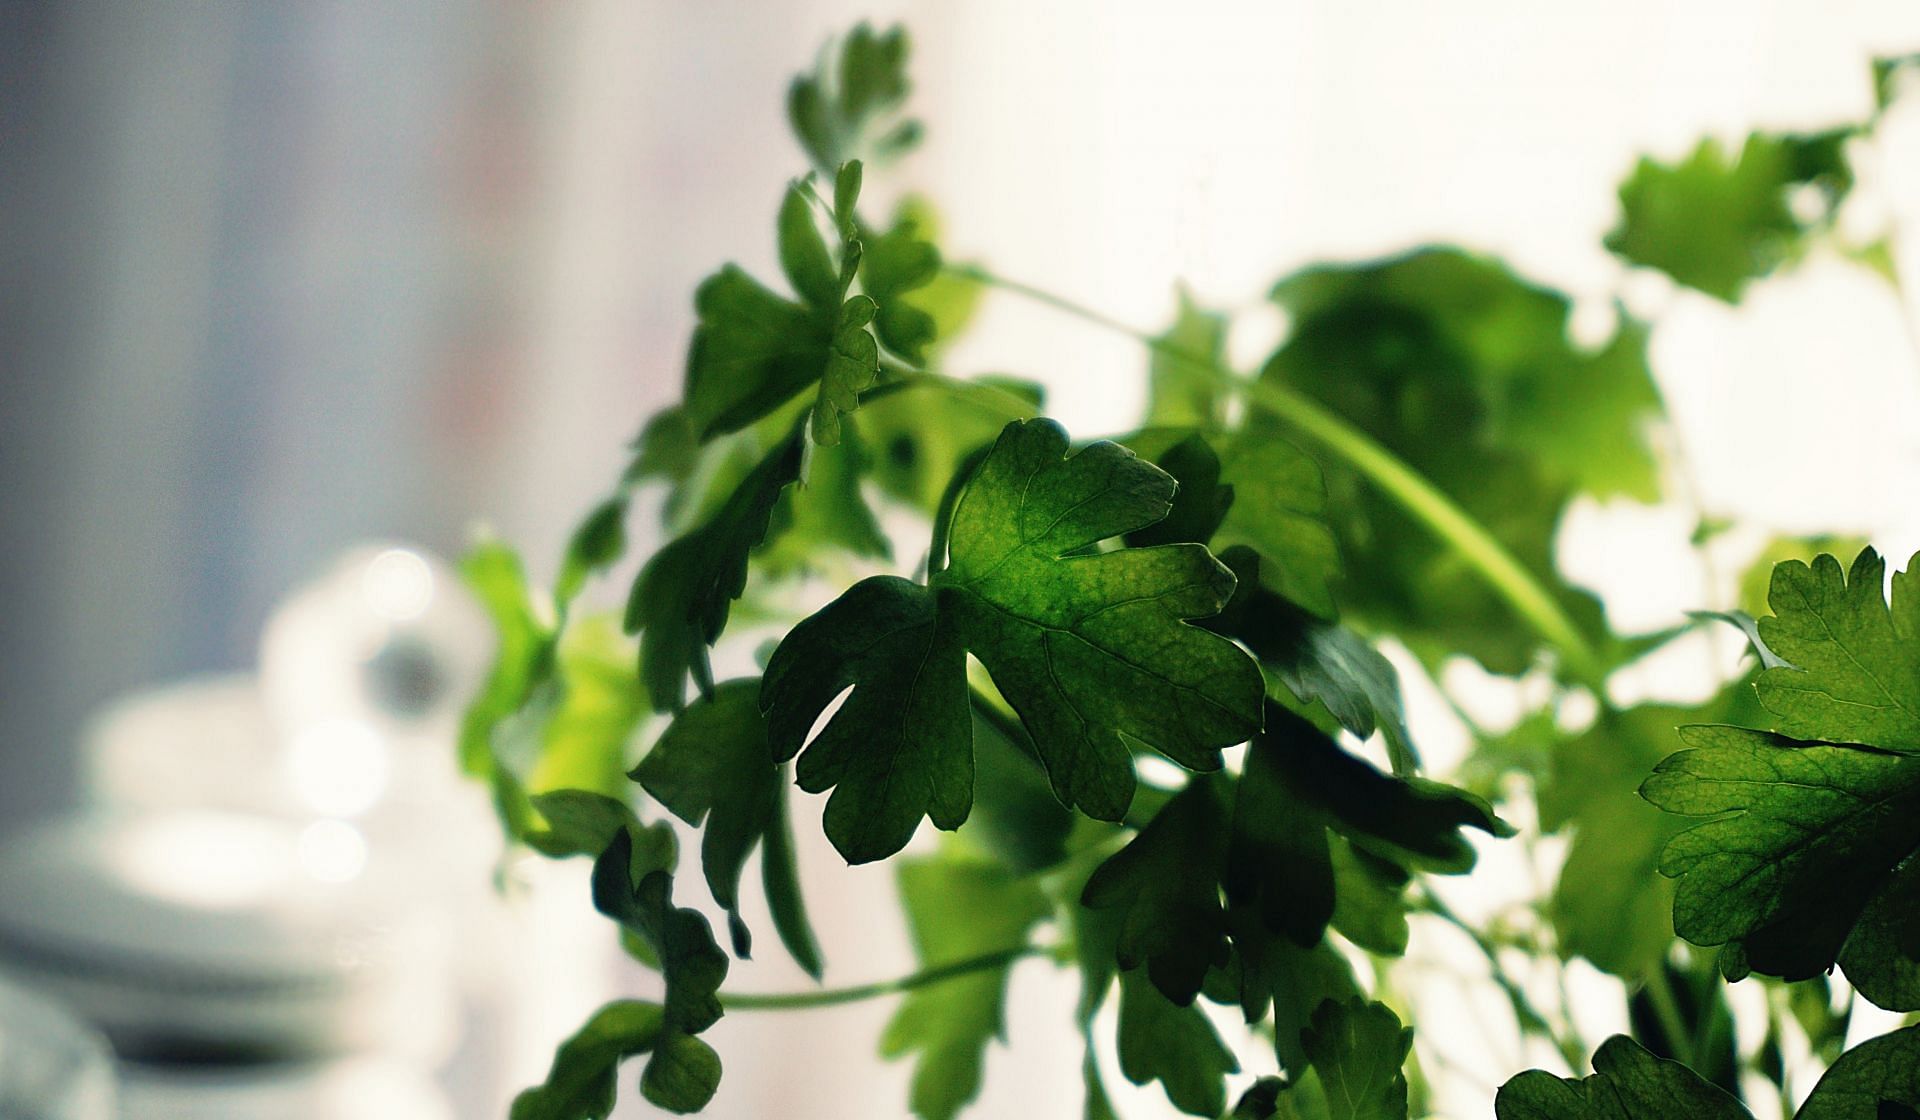 Parsley for fresh breath (image sourced via Pexels / Photo by Suzy)